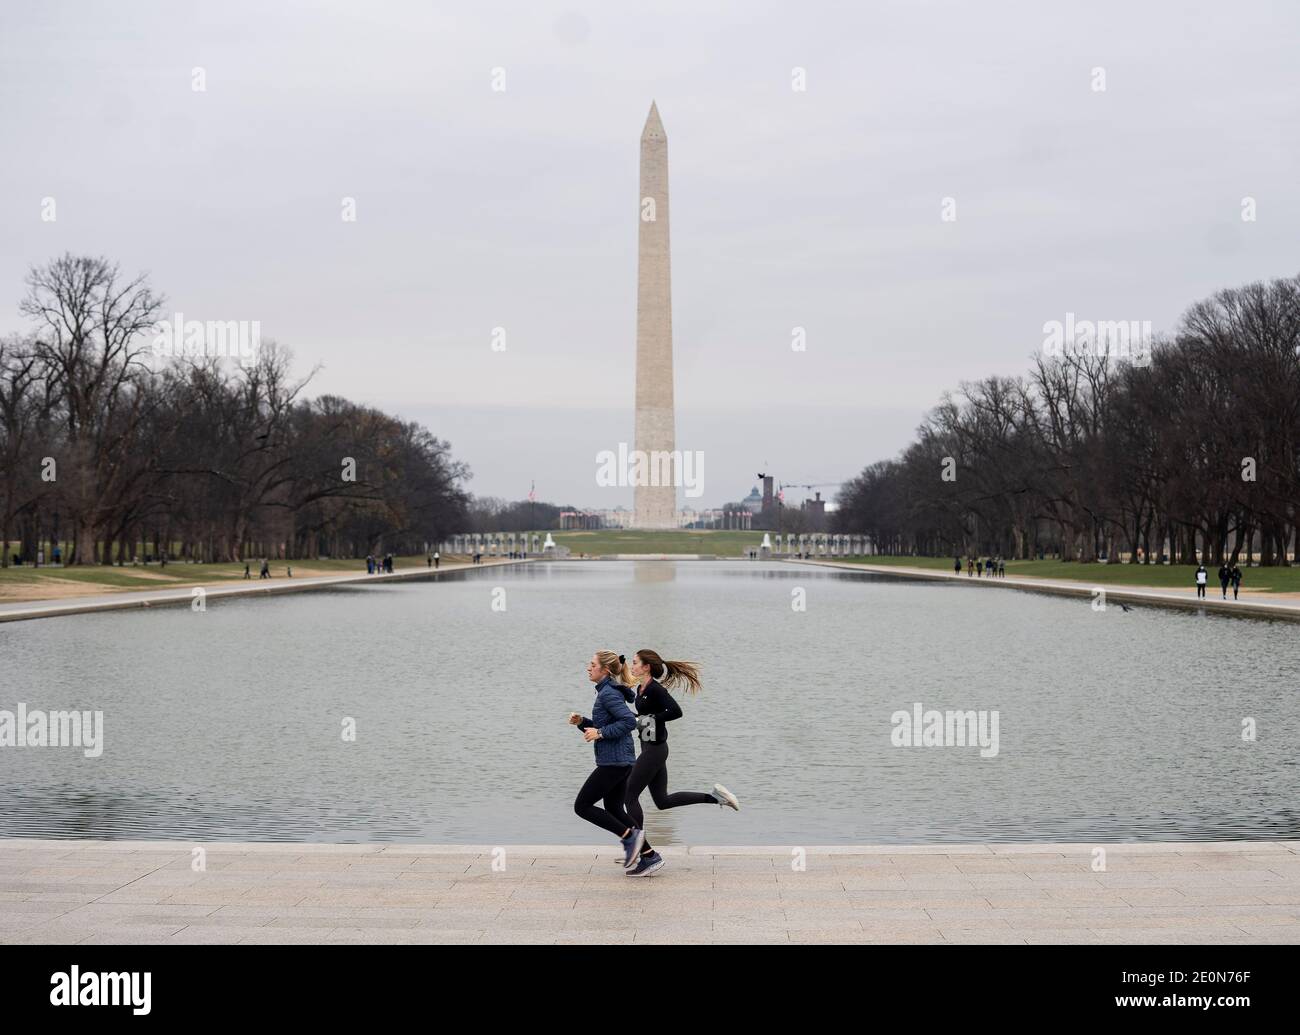 Washington, USA. 1st Jan, 2021. People jog near the Lincoln Memorial Reflecting Pool in Washington, DC, the United States, on Jan. 1, 2021. The confirmed COVID-19 cases in the United States topped 20 million on Friday as the discovery of a highly contagious new virus strain in the country increases pressure to speed up the vaccination process. Credit: Liu Jie/Xinhua/Alamy Live News Stock Photo